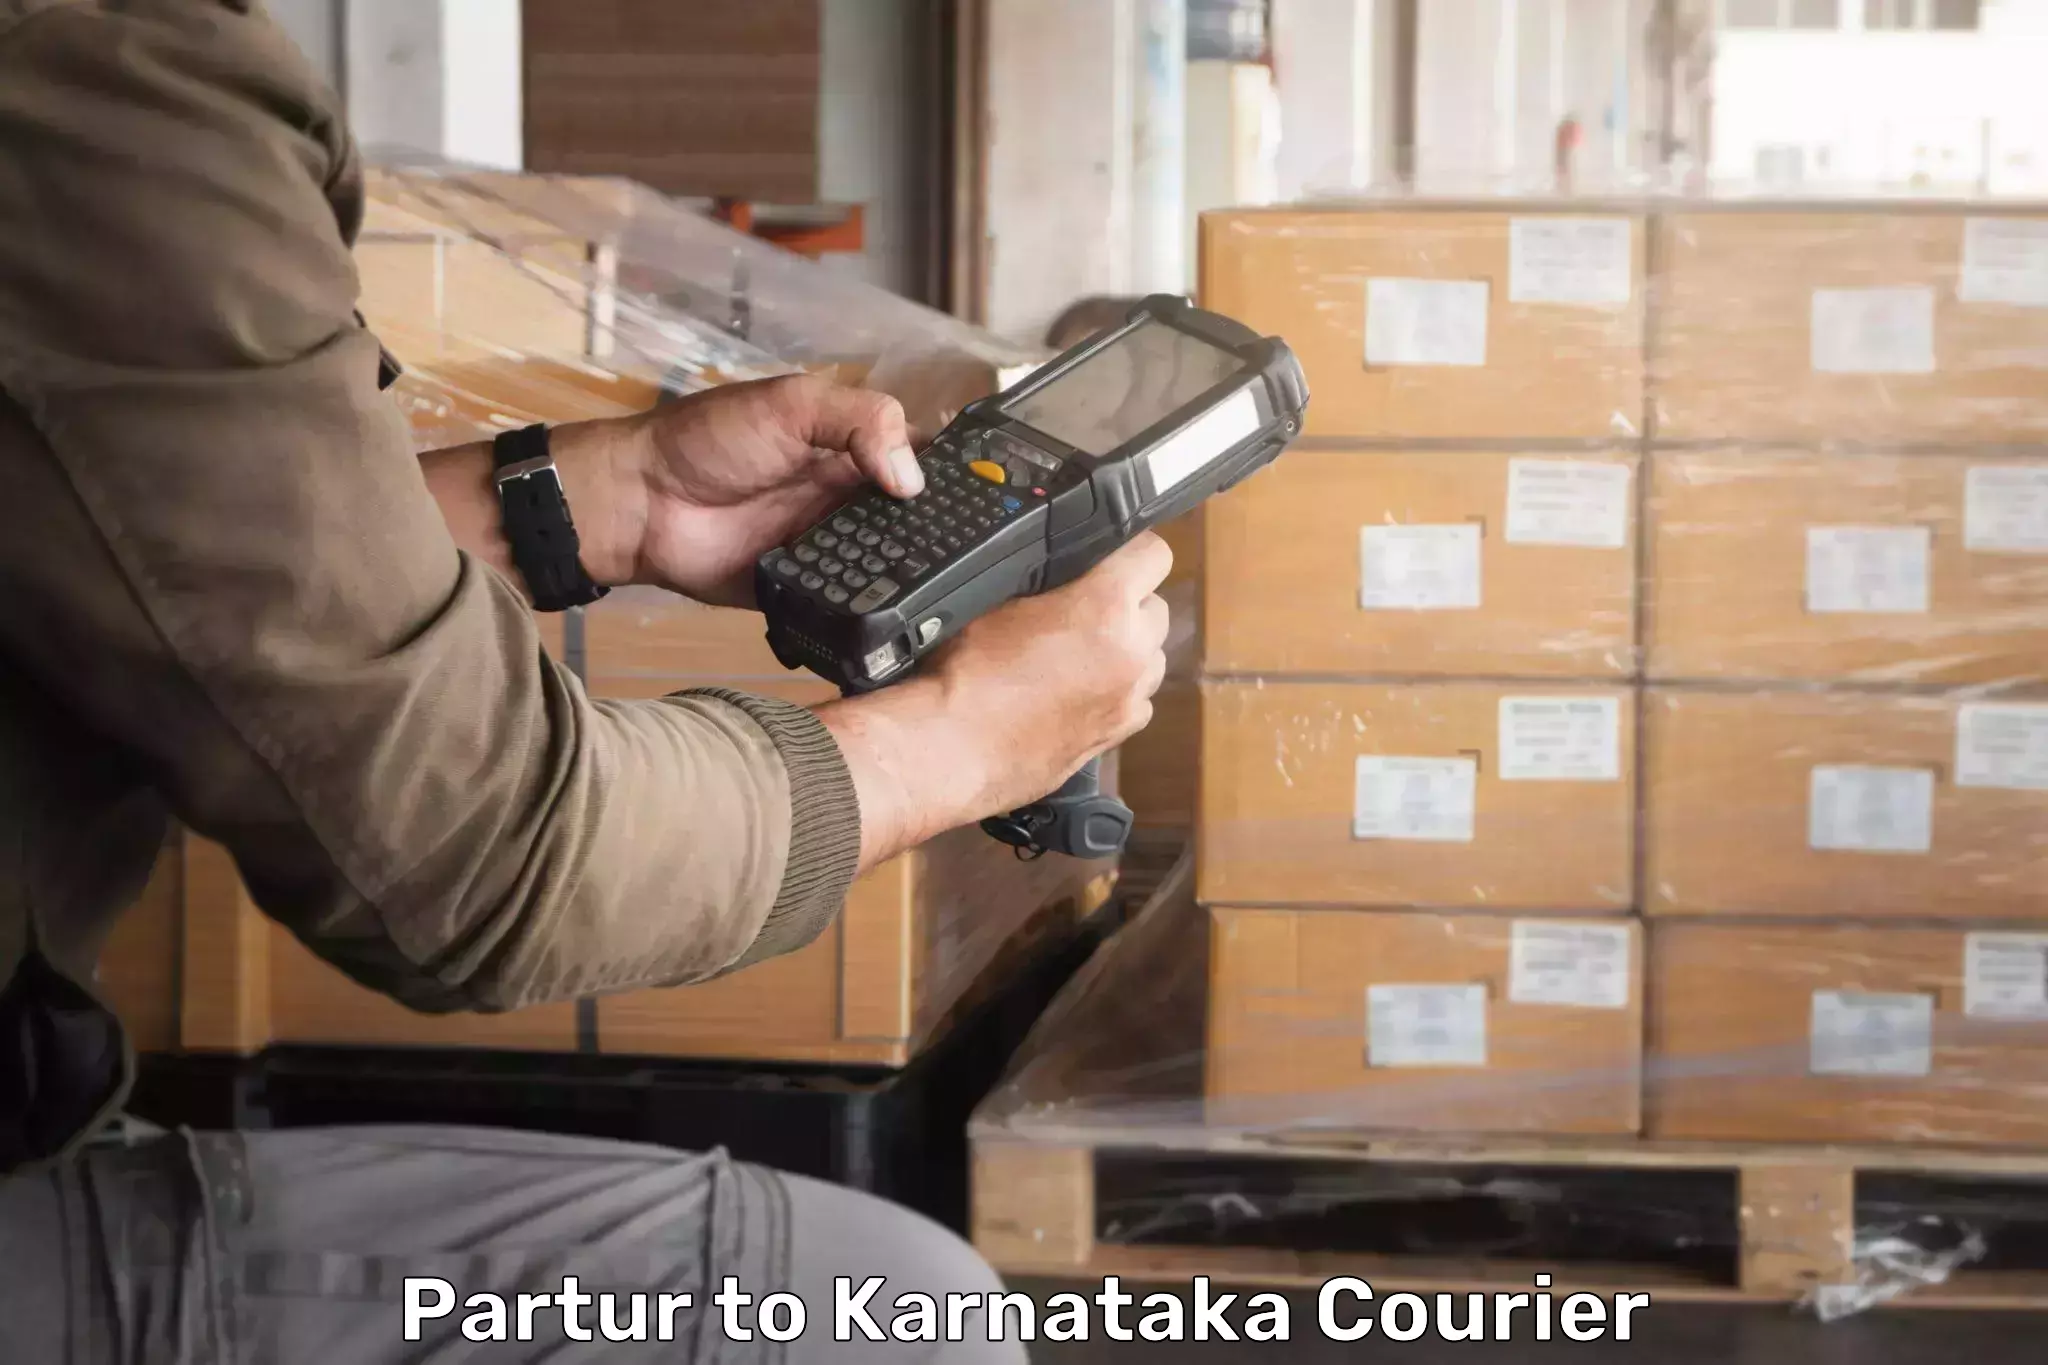 Track and trace shipping Partur to Karnataka